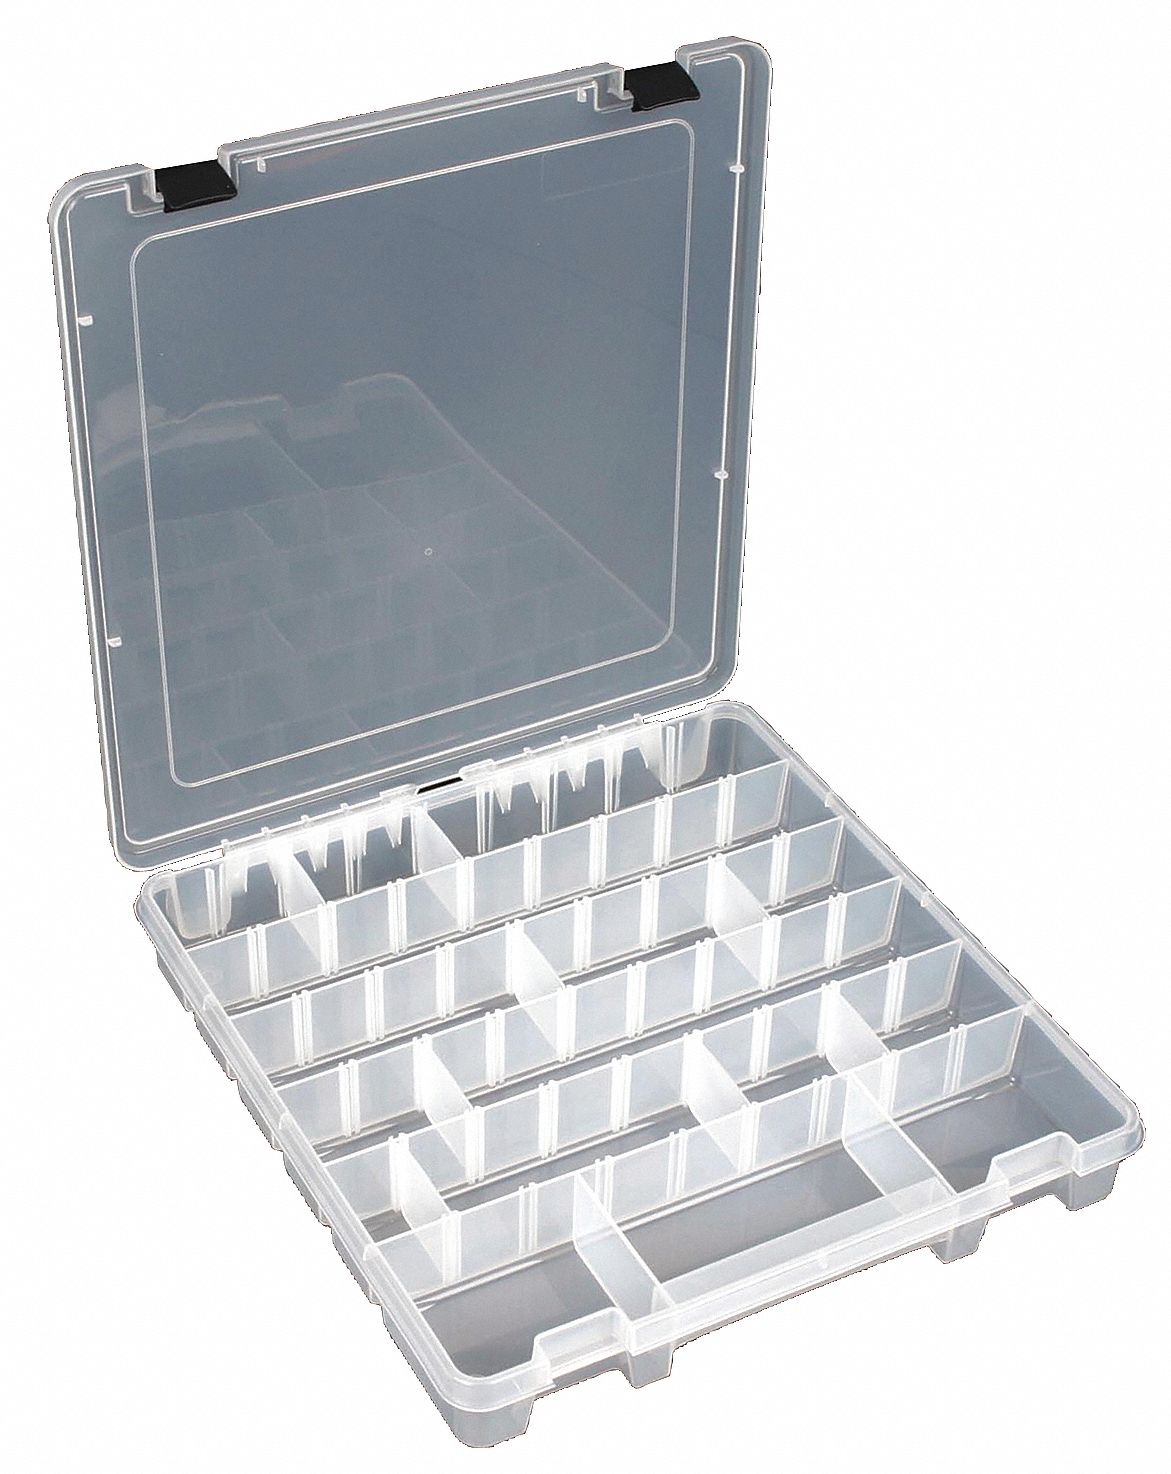 30C449 - Adjustable Compartment Box Clear